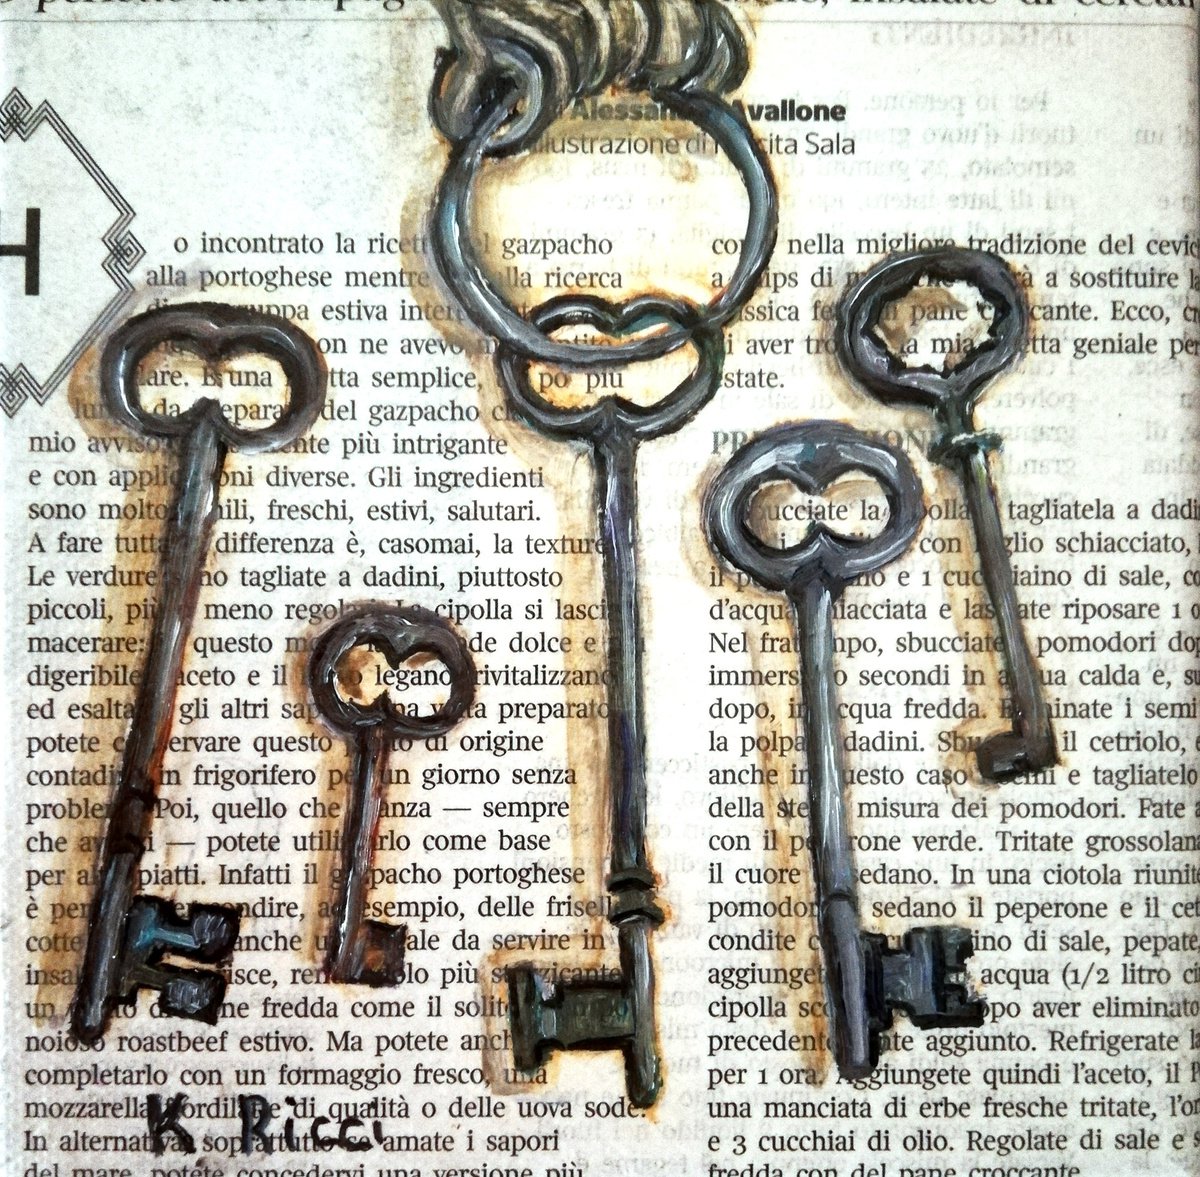 Skeleton Keys on Newspaper Original Oil on Canvas Painting 6 by 6 inches (15x15 cm) by Katia Ricci